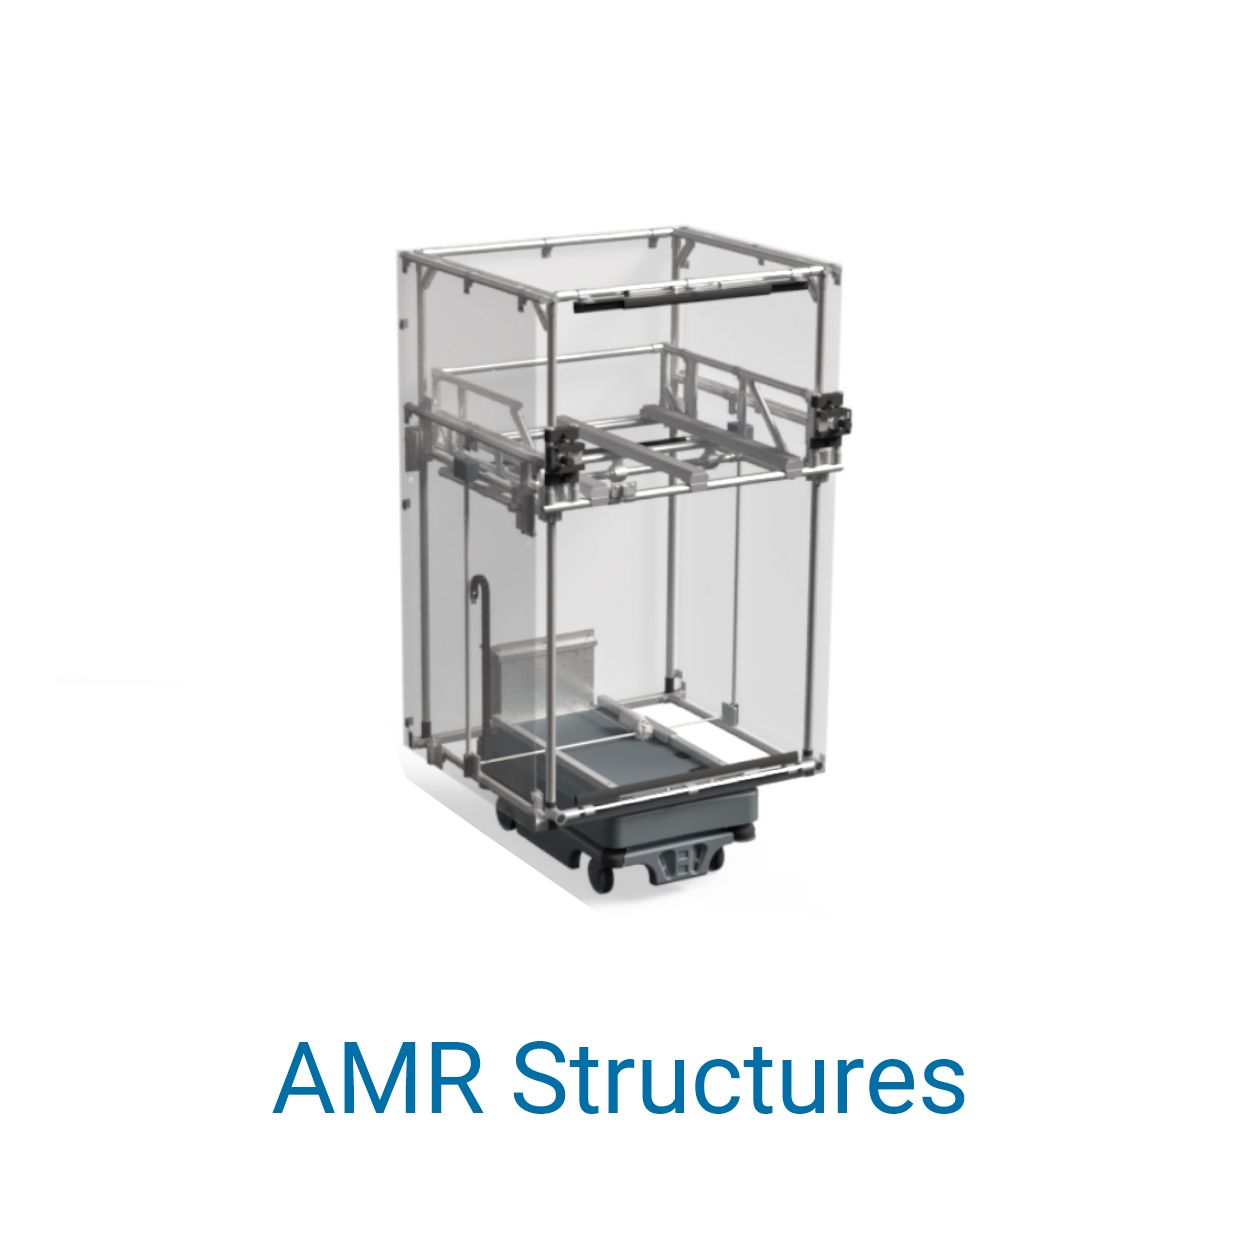 Rendering of an AMR structure from BeeWaTec 